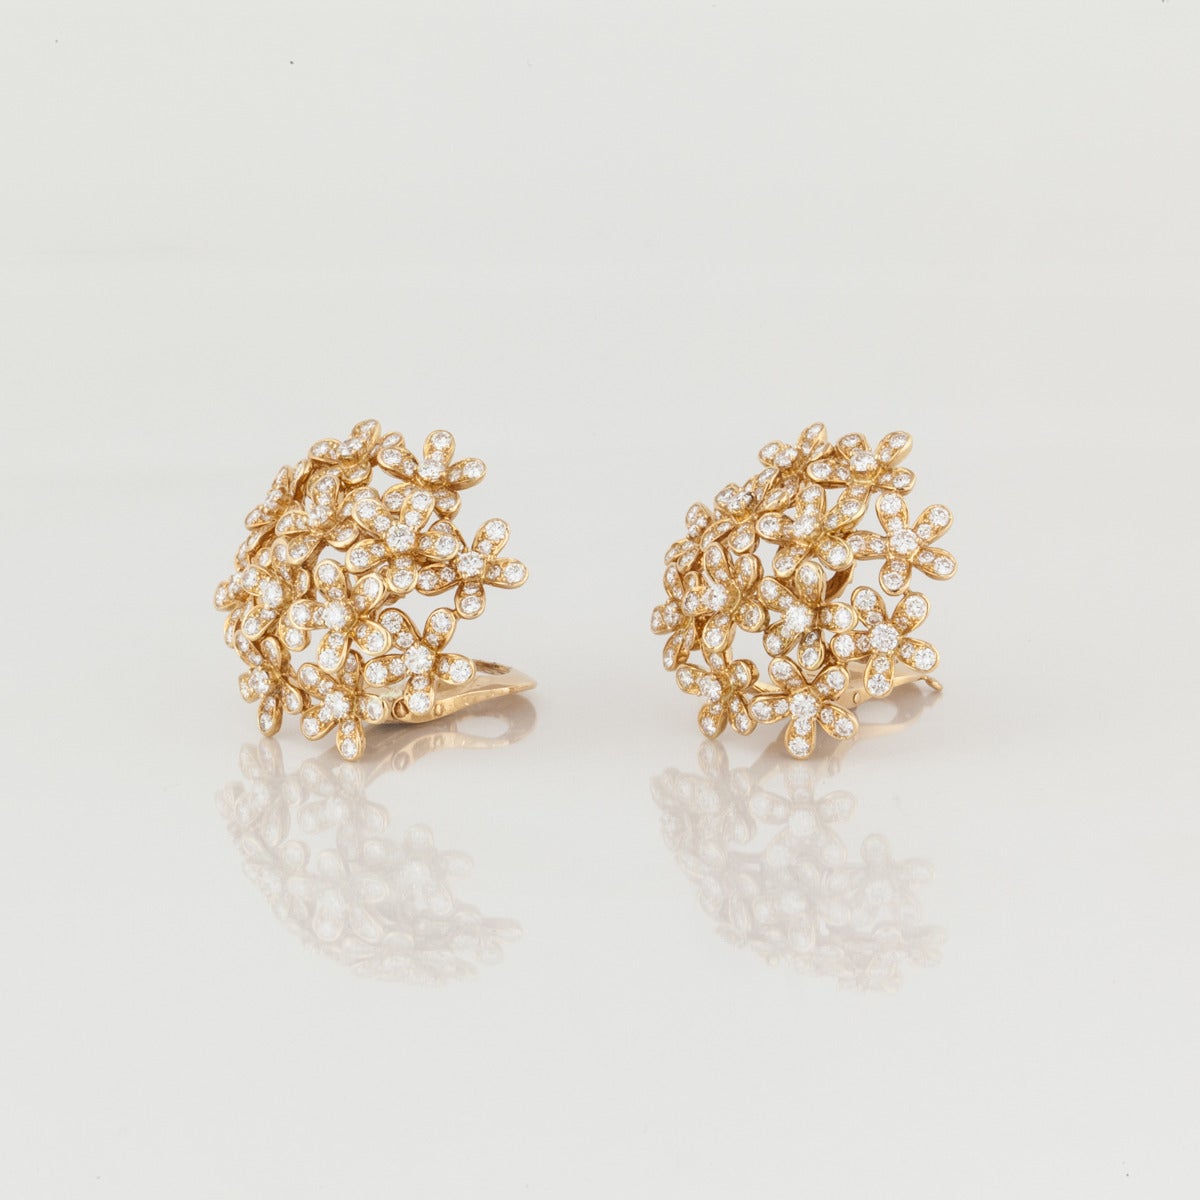 Van Cleef and Arpels 18K yellow gold earrings from the Socrate collection.  The earrings feature 264 round diamonds totaling 7.02 carat,  F-G color and VVS-VS clarity.  They are marked 